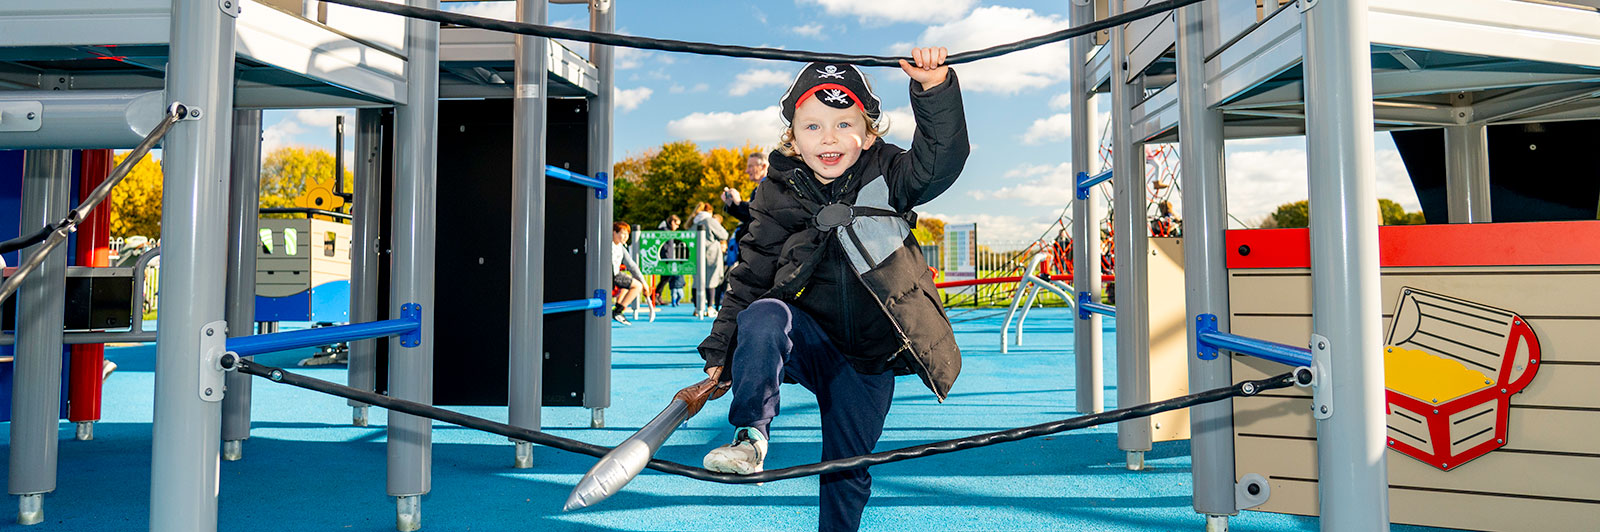 A young boy dressed a pirate and holding a toy sword is smiling directly at the camera while making his way through ropes across the play unit.